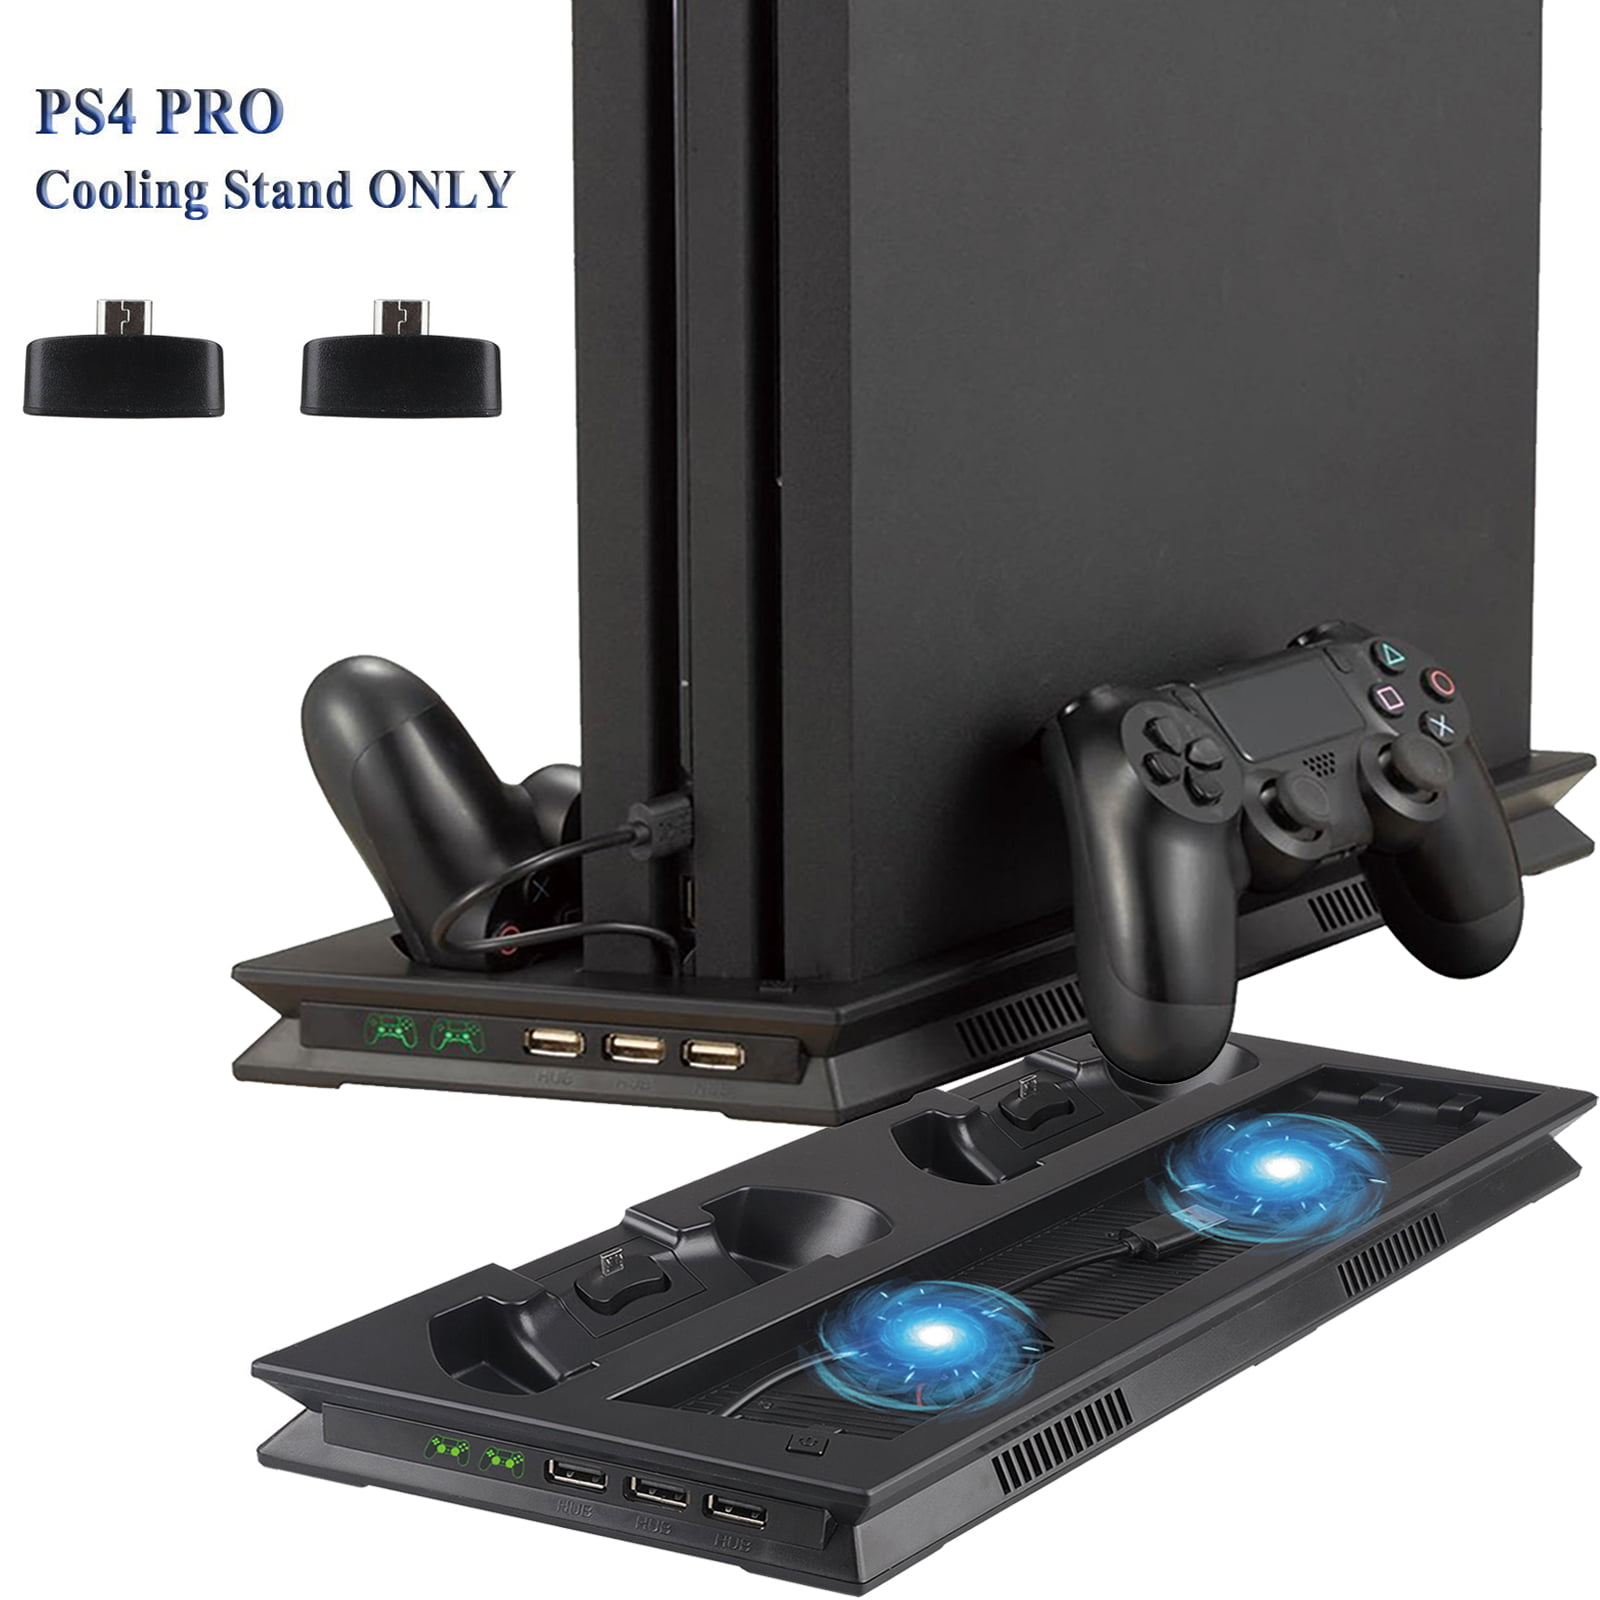 ps4 pro cooling stand worth it